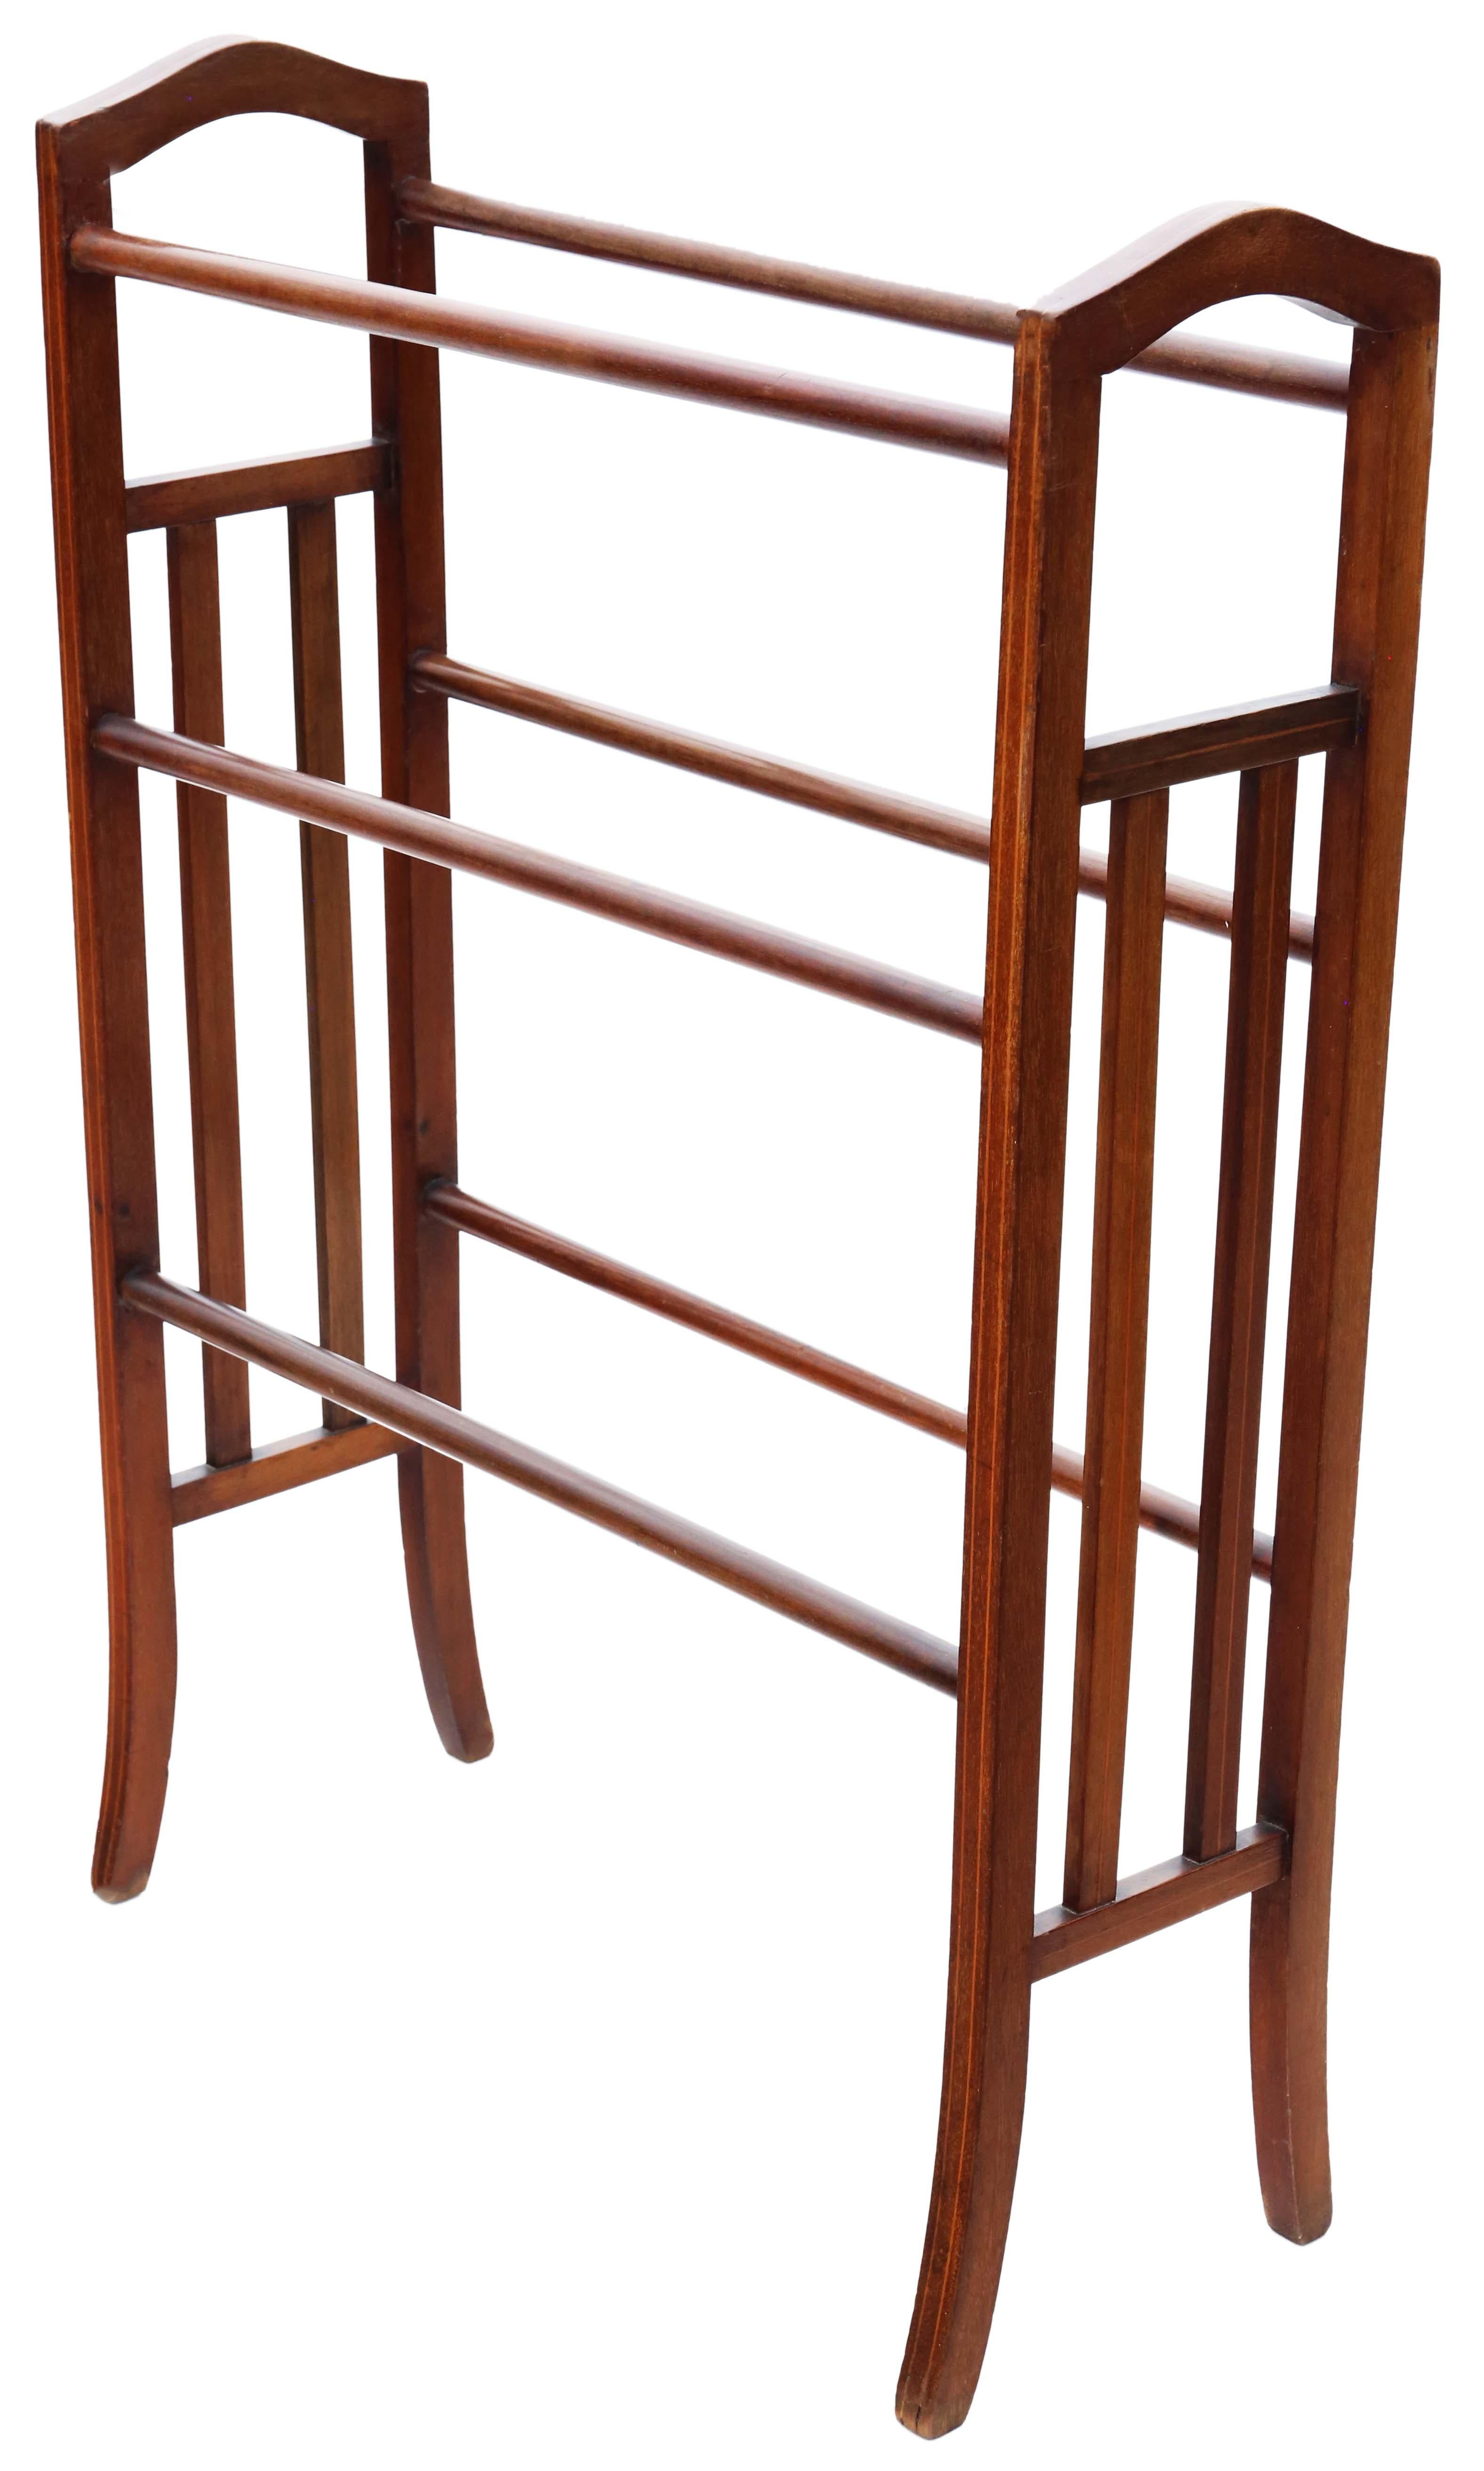 Antique quality C1910 inlaid mahogany towel rail stand Art Nouveau.

No loose joints and no woodworm.

Would look amazing in the right location!

Overall maximum dimensions:

66cmW x 27cmD x 94cmH.

In good antique condition with minor historic